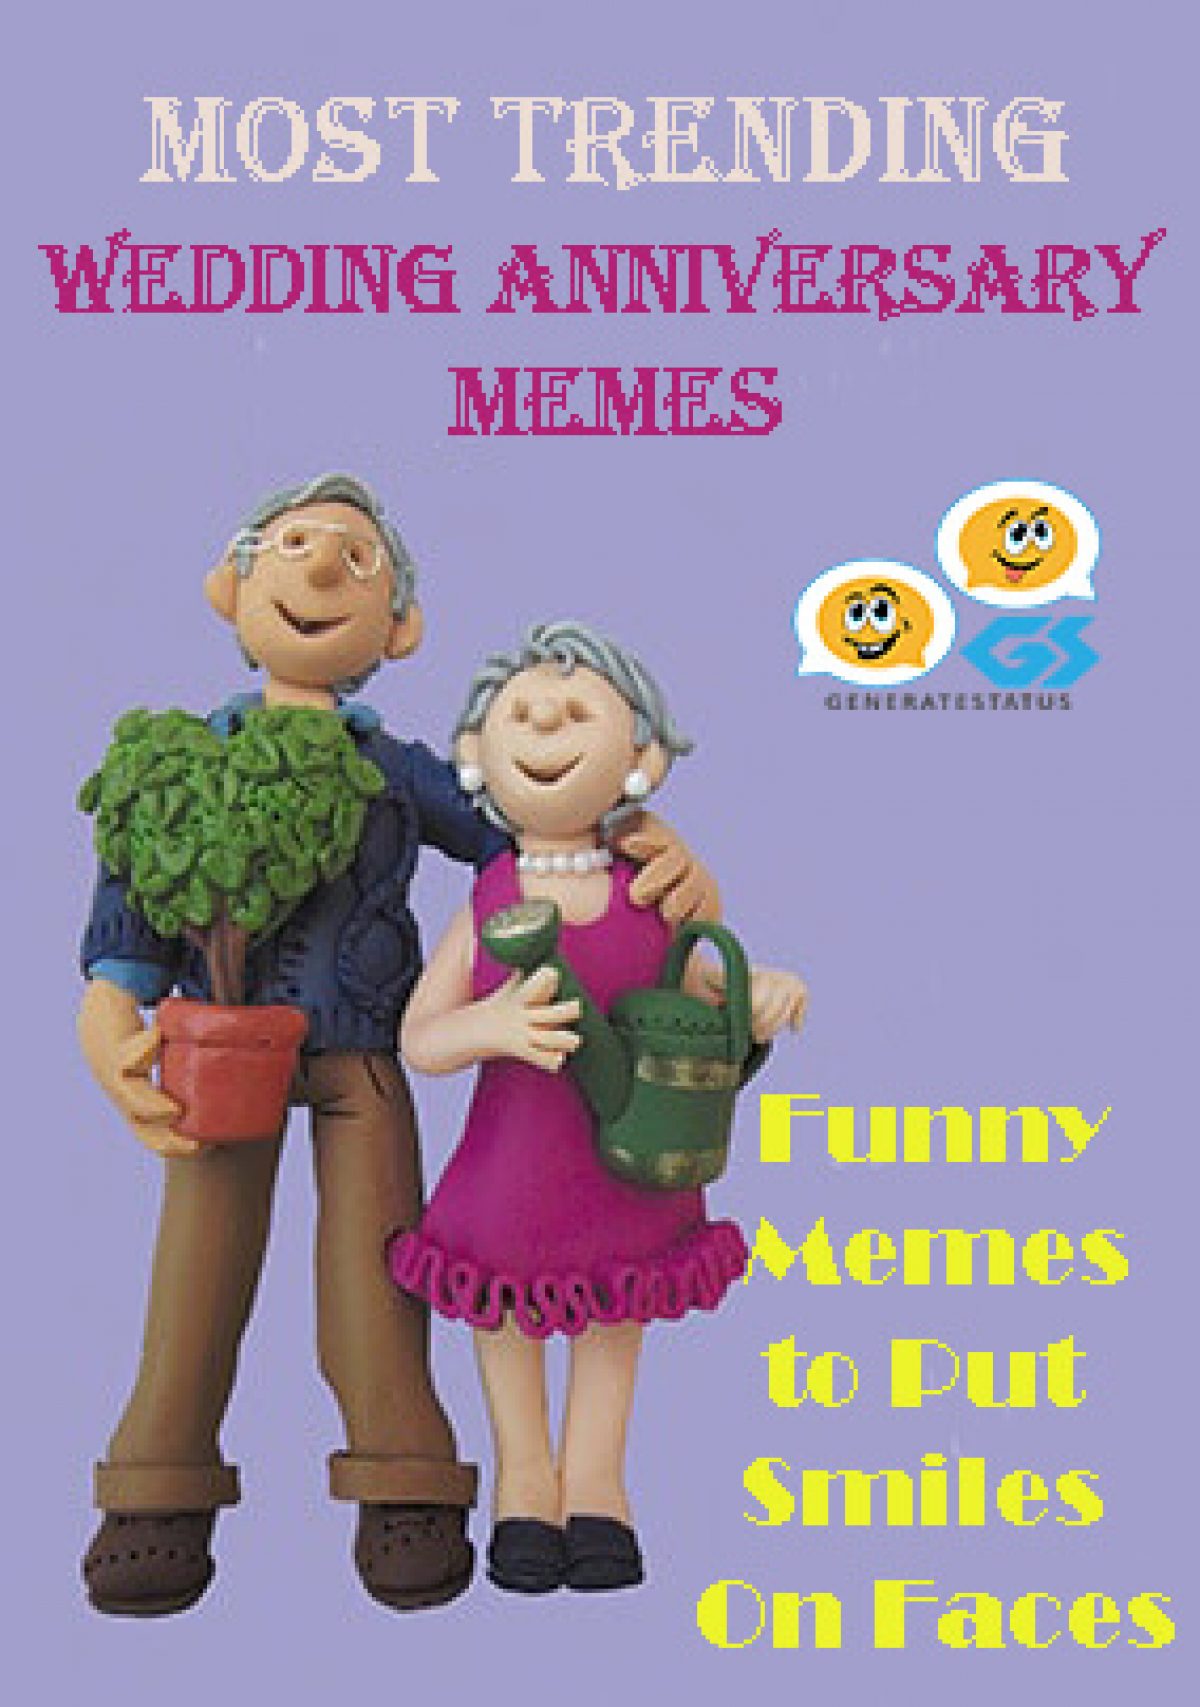 Wedding Anniversary Meme For Wife, Husband and Loved Ones